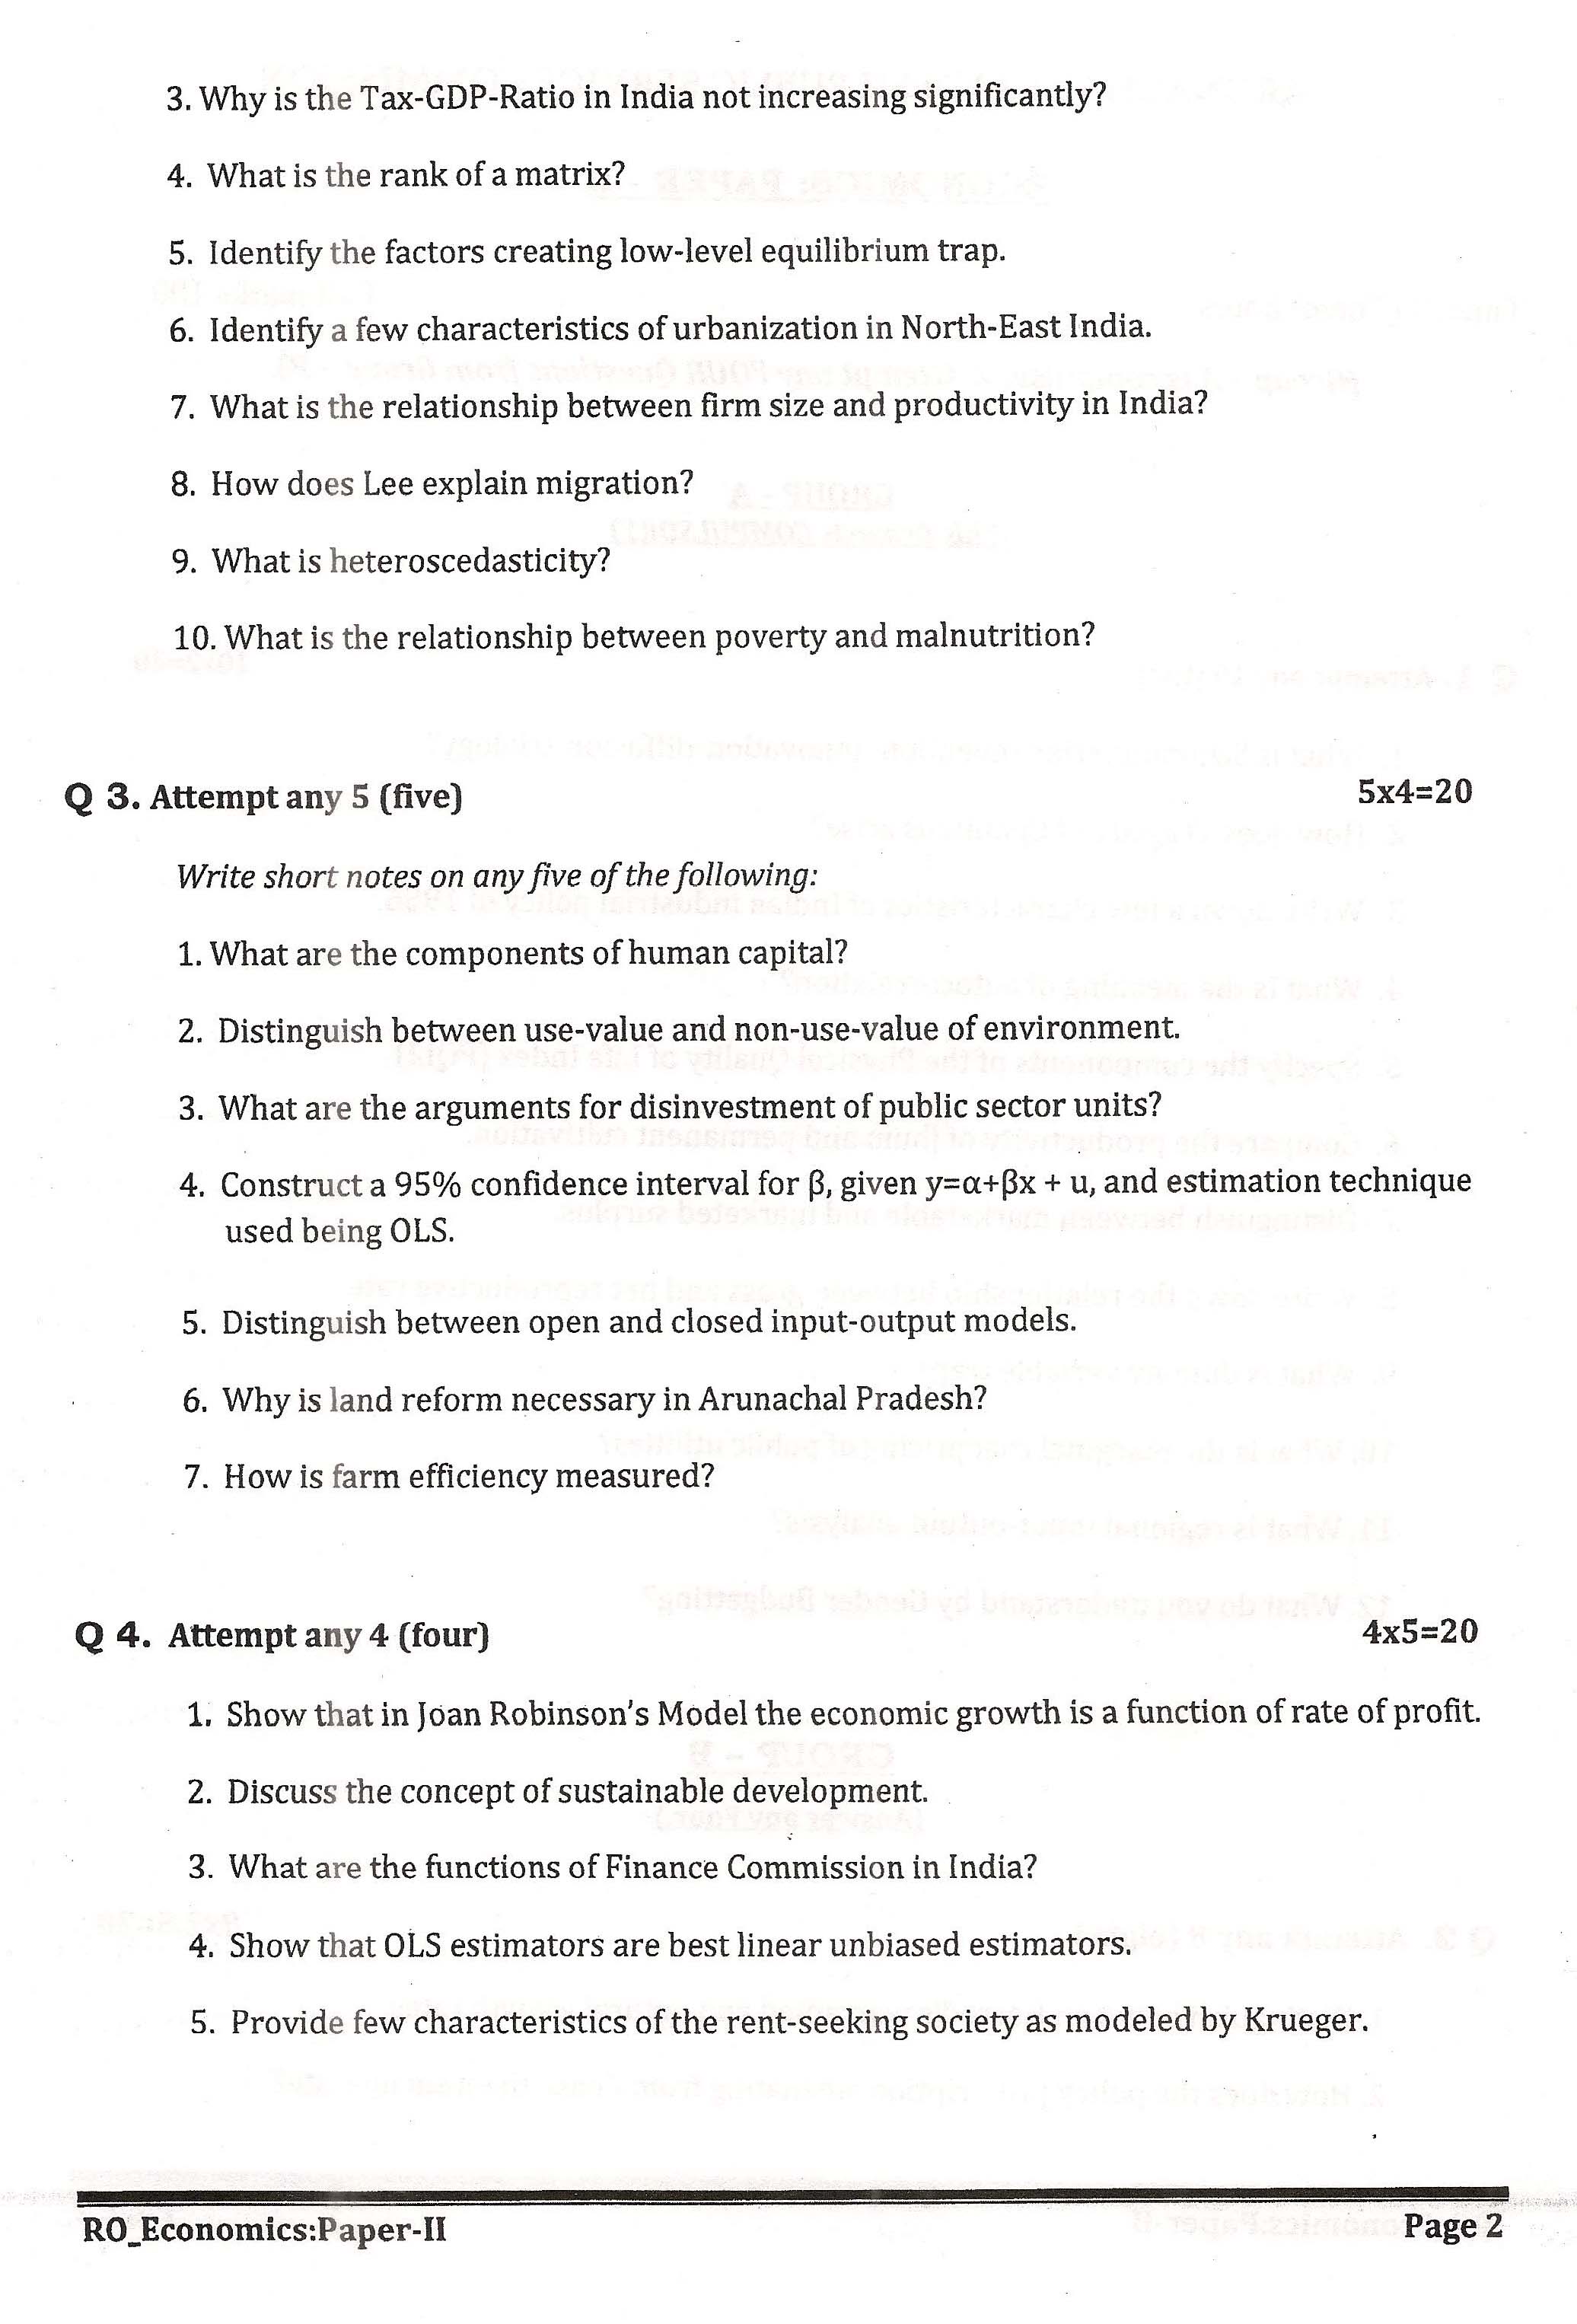 APPSC Research Officer Economics Paper II Exam Question Paper 2014 2